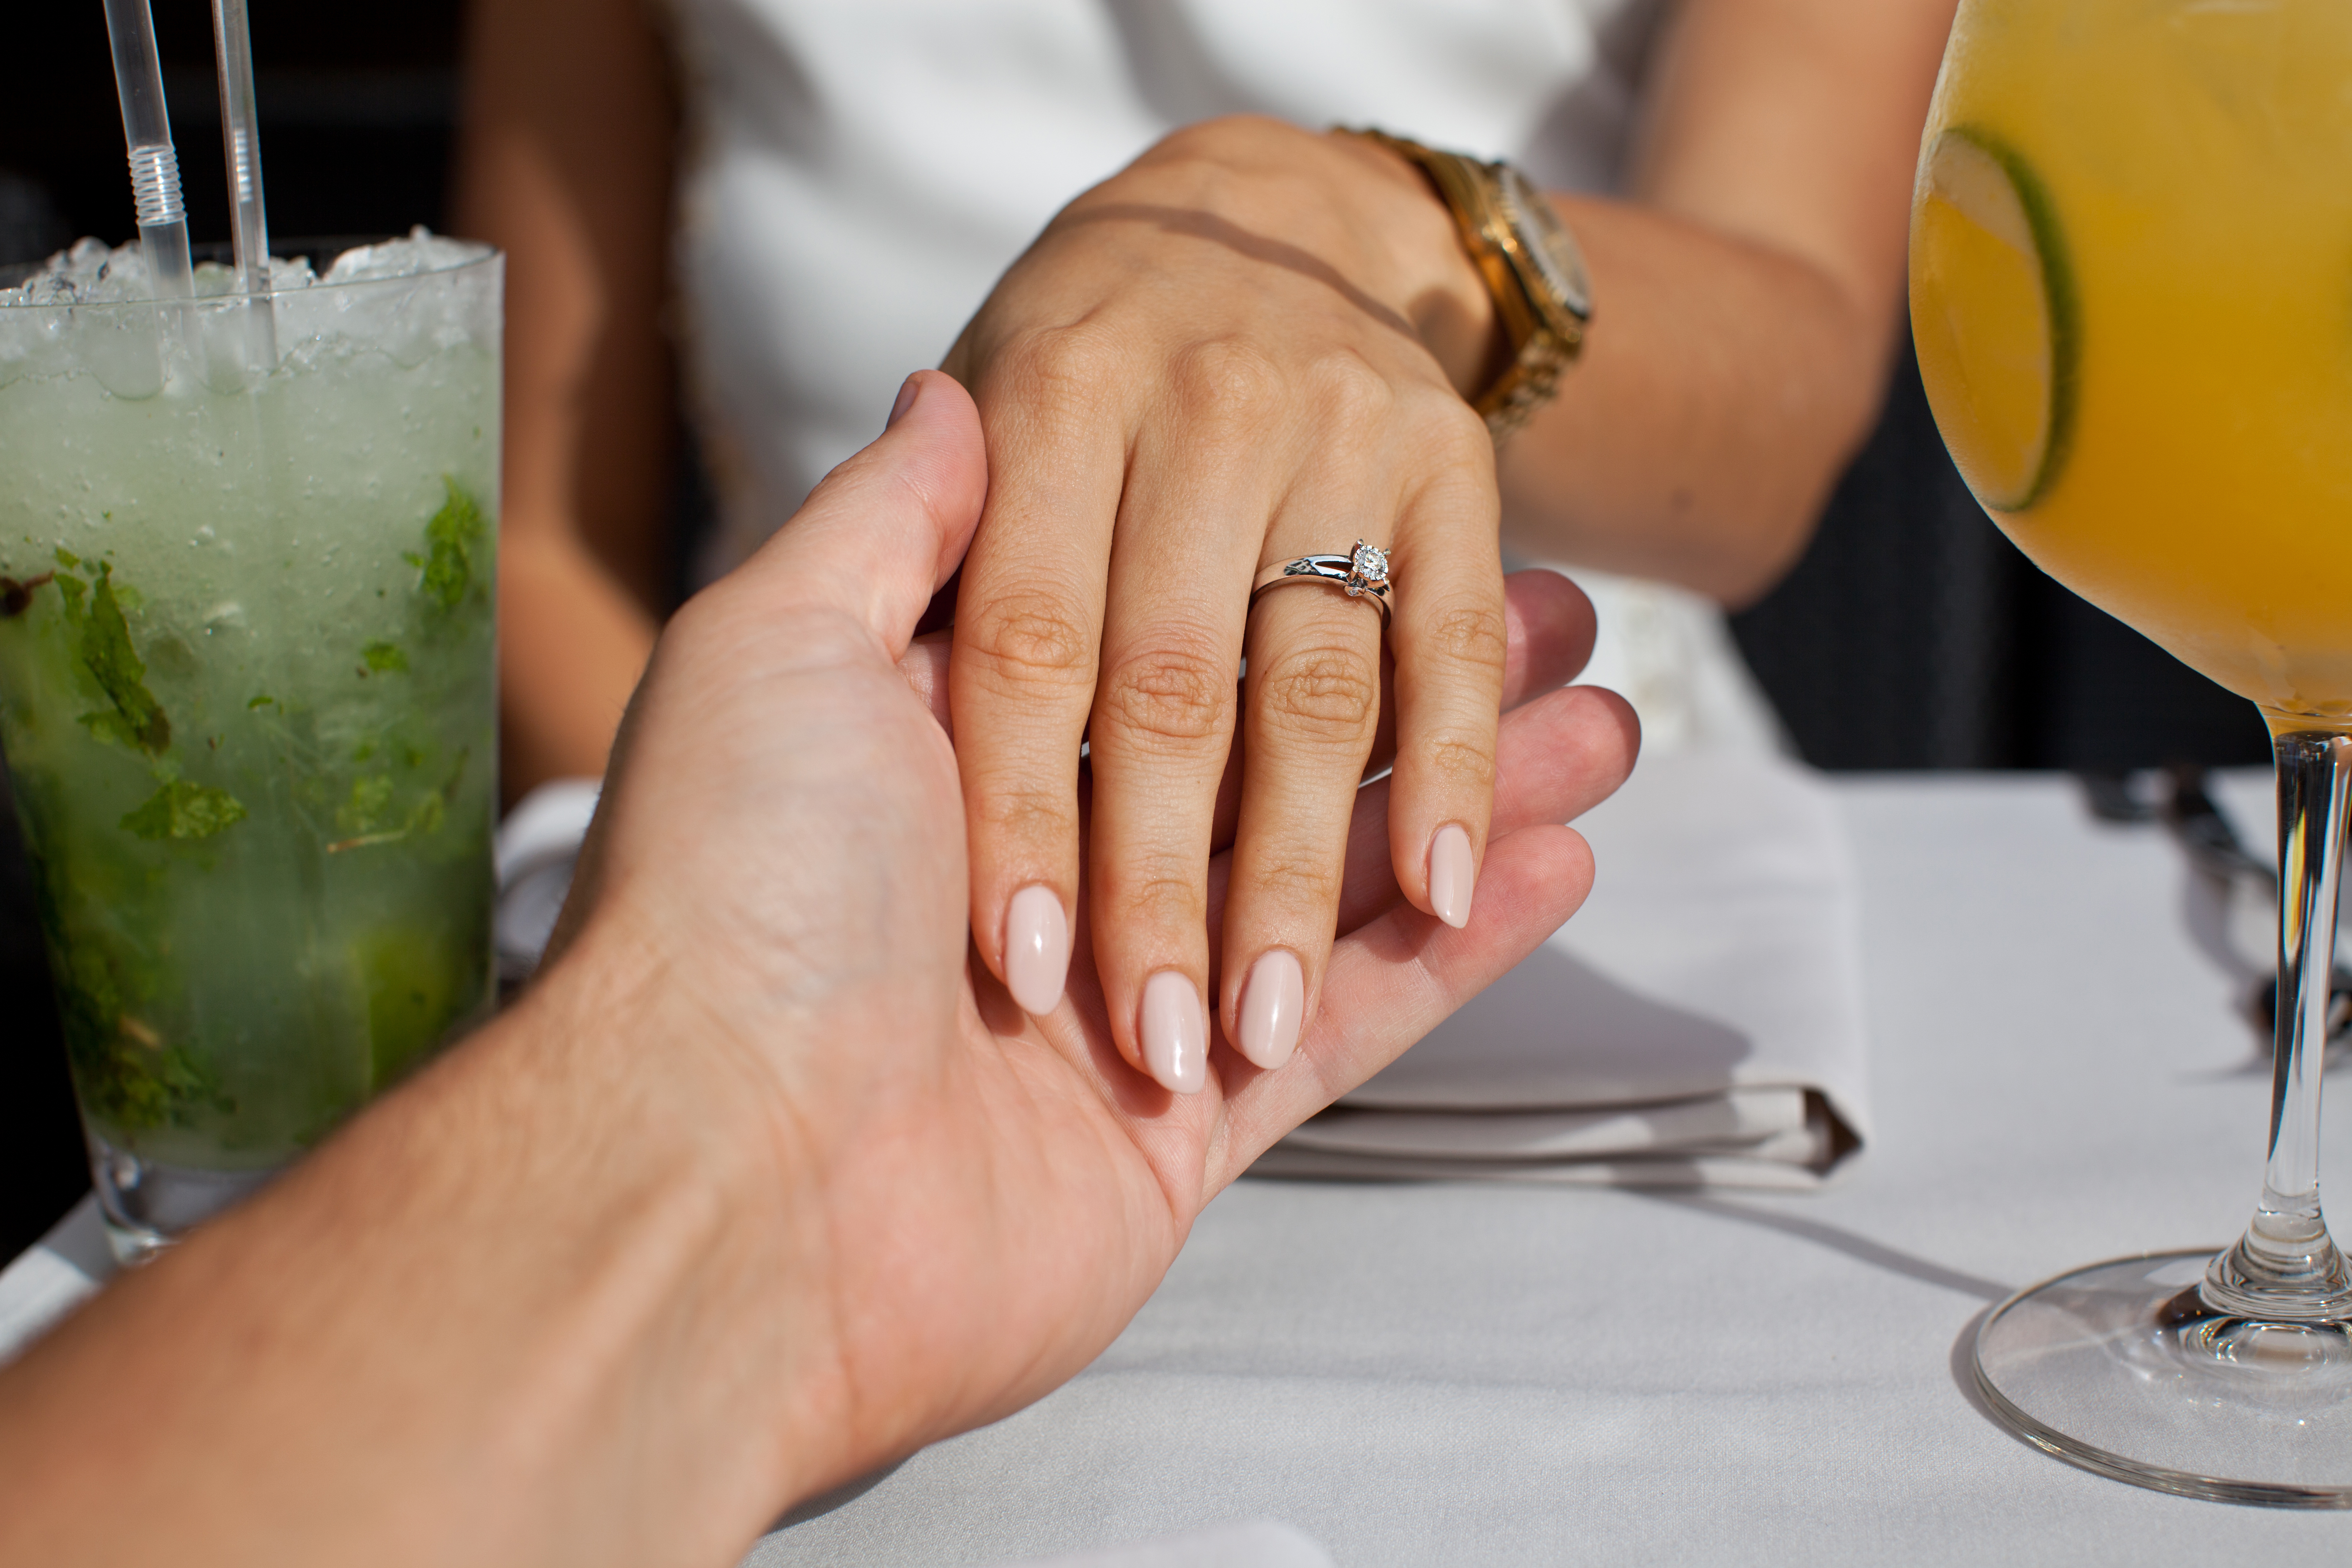 A man holding a woman's hand adorned with an engagement ring | Source: Shutterstock